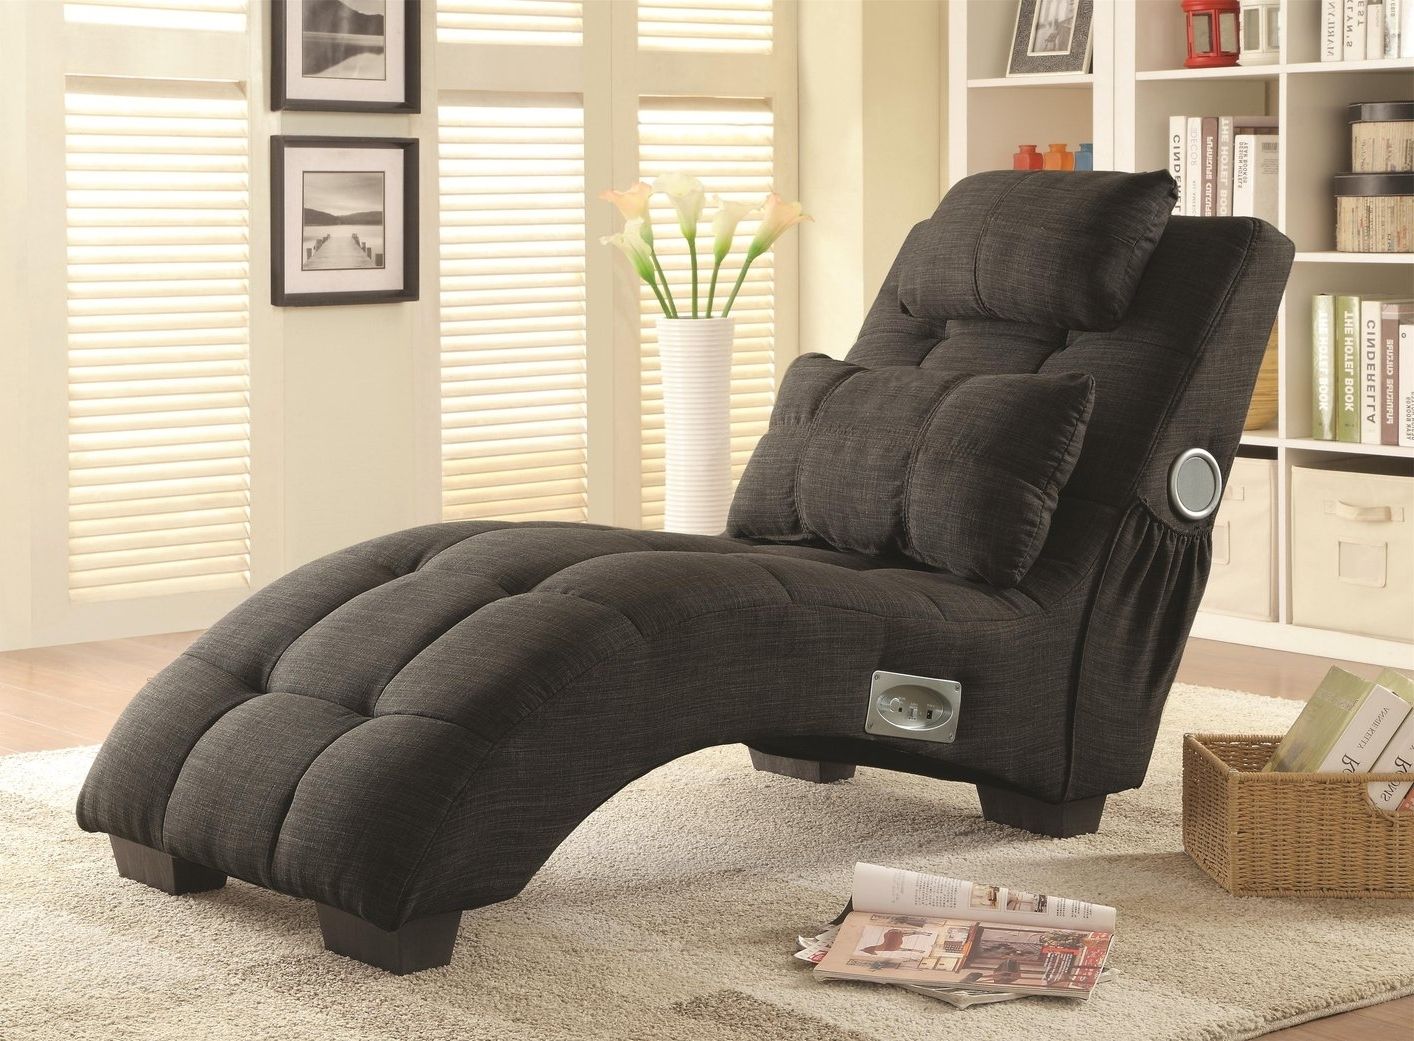 Newest Fabric Chaise Lounge Chairs Pertaining To Grey Fabric Chaise Lounge – Steal A Sofa Furniture Outlet Los (View 5 of 15)